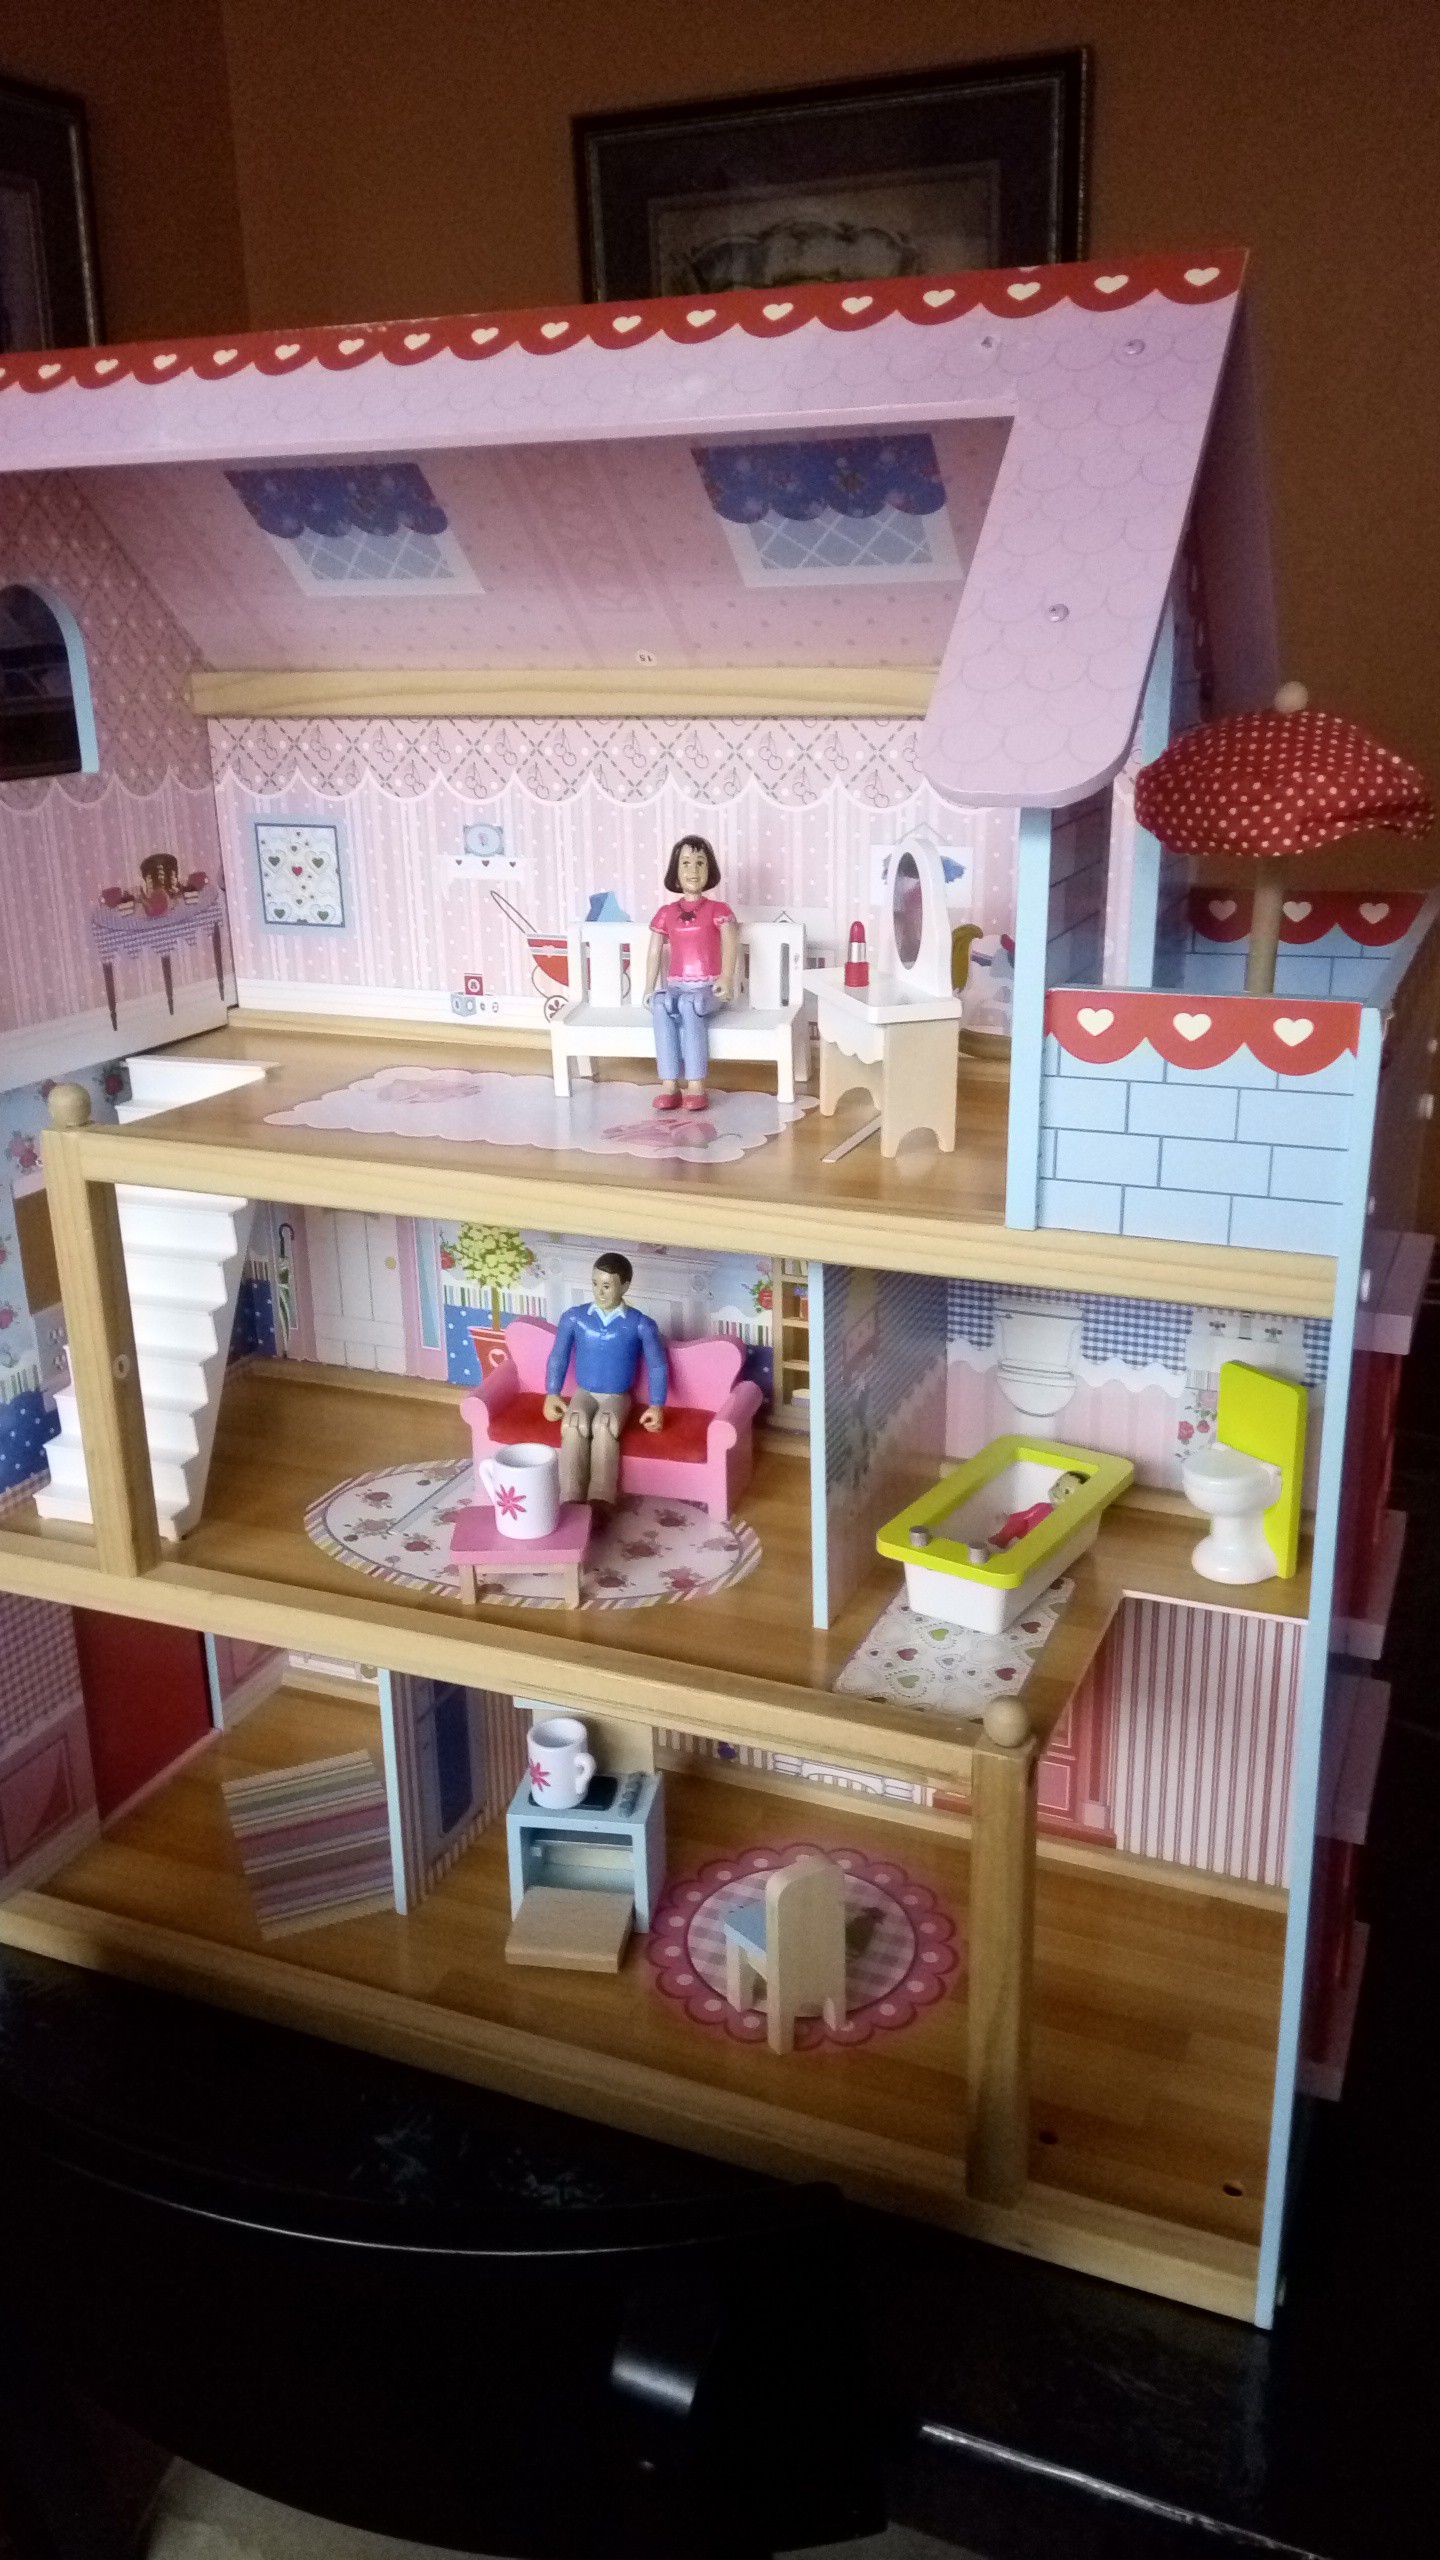 Kidkraft doll house with furniture and 3 articulated figures, dolls. 28" x 24" x 10"